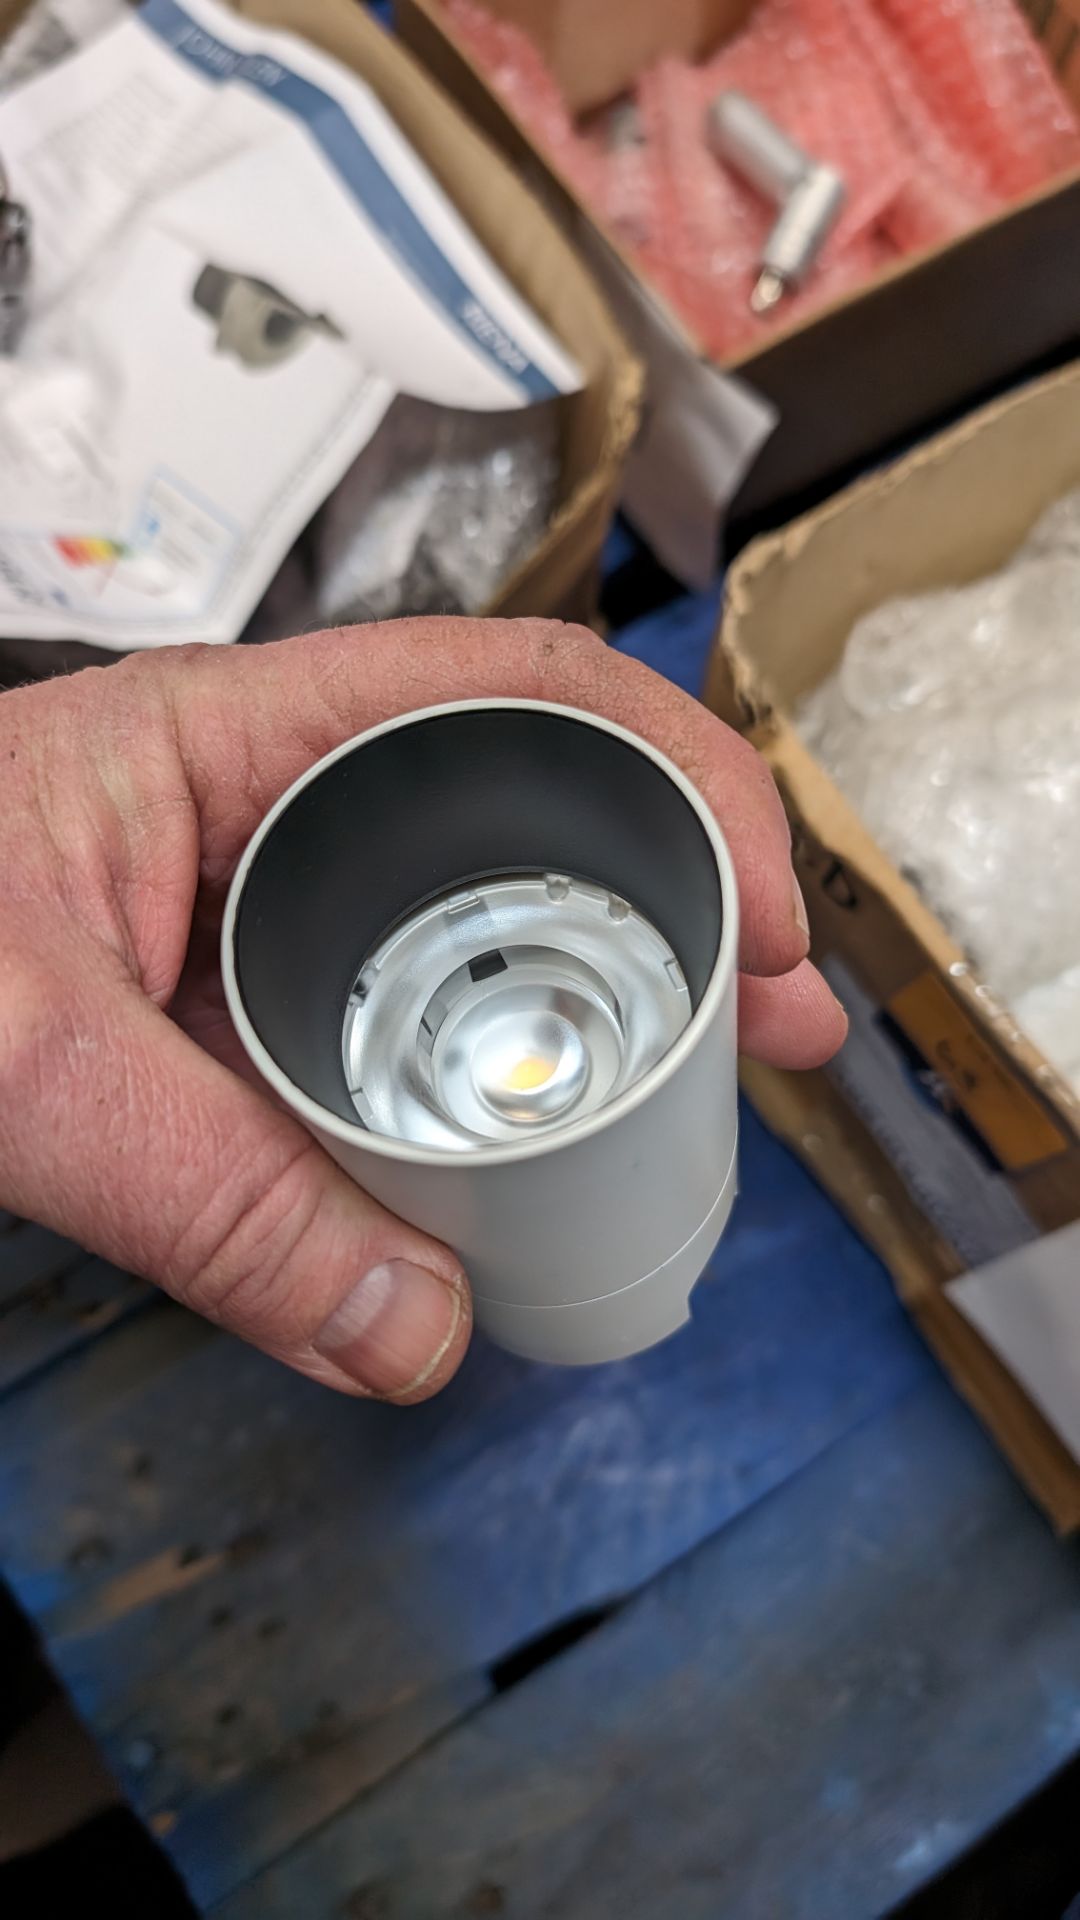 13 off Vorsa Port50 IP20 LED white spot lamps for use with tracking systems - tracking fitting requi - Image 6 of 7